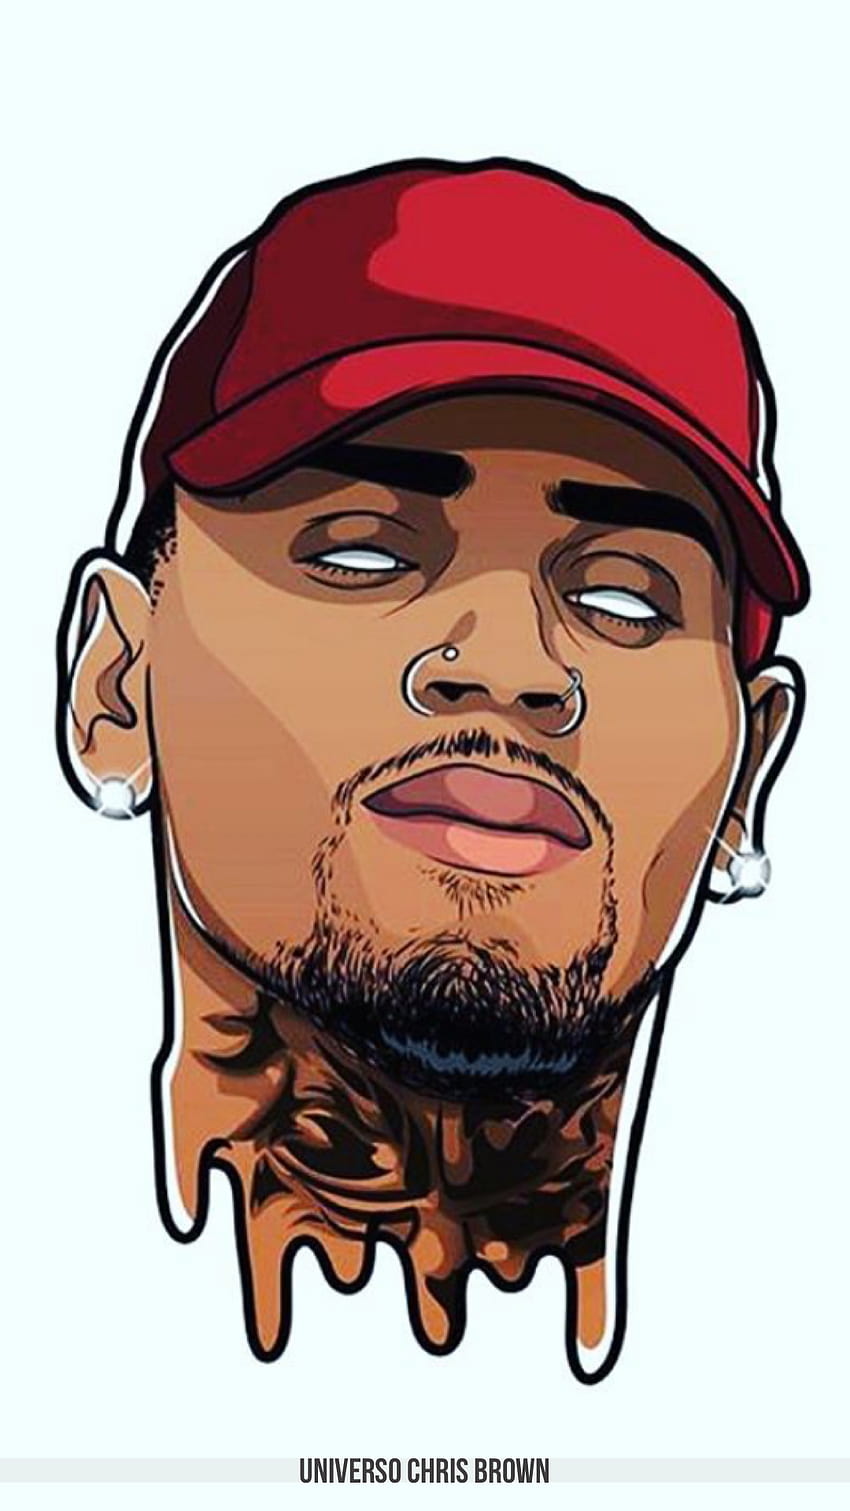 1920x1080px, 1080P Free download | Breezy Edit in 2020, chris brown ...